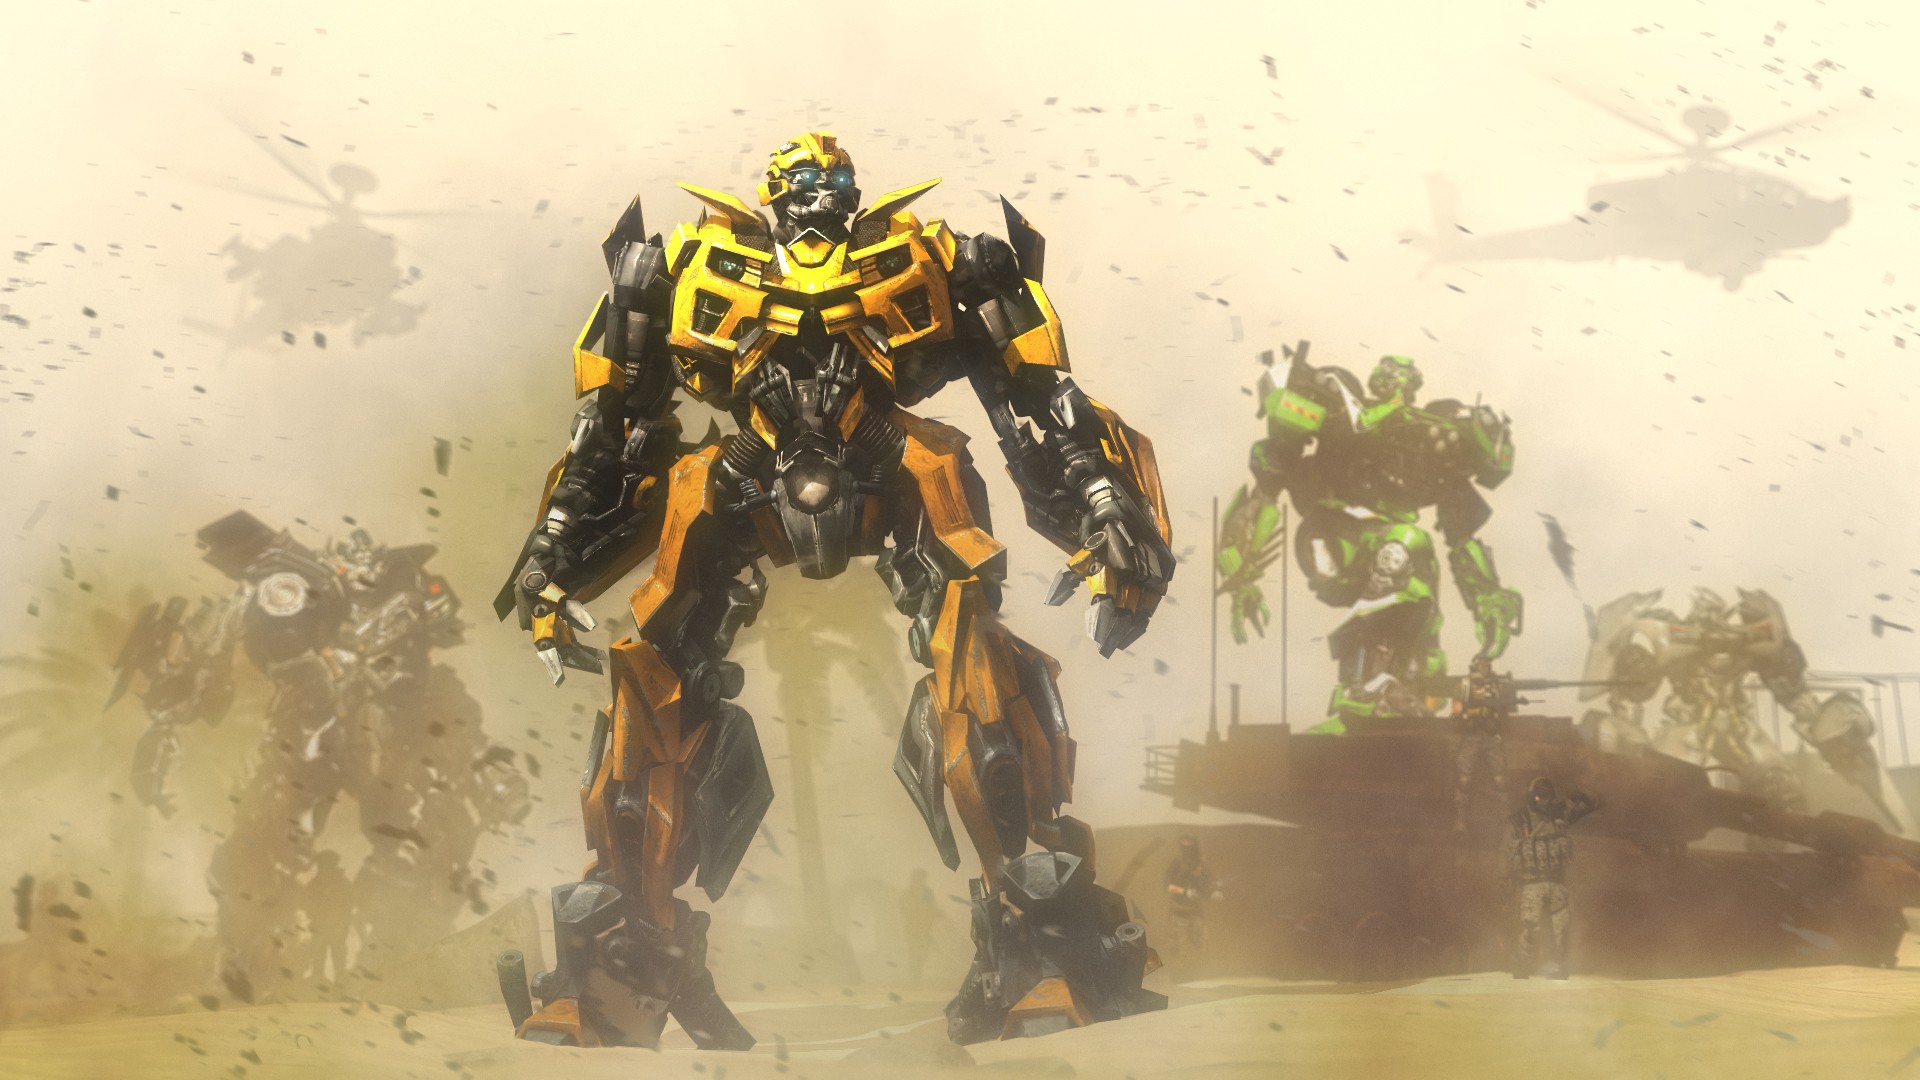 General 1920x1080 Transformers Bumblebee (transformers) robot yellow science fiction movies Hasbro